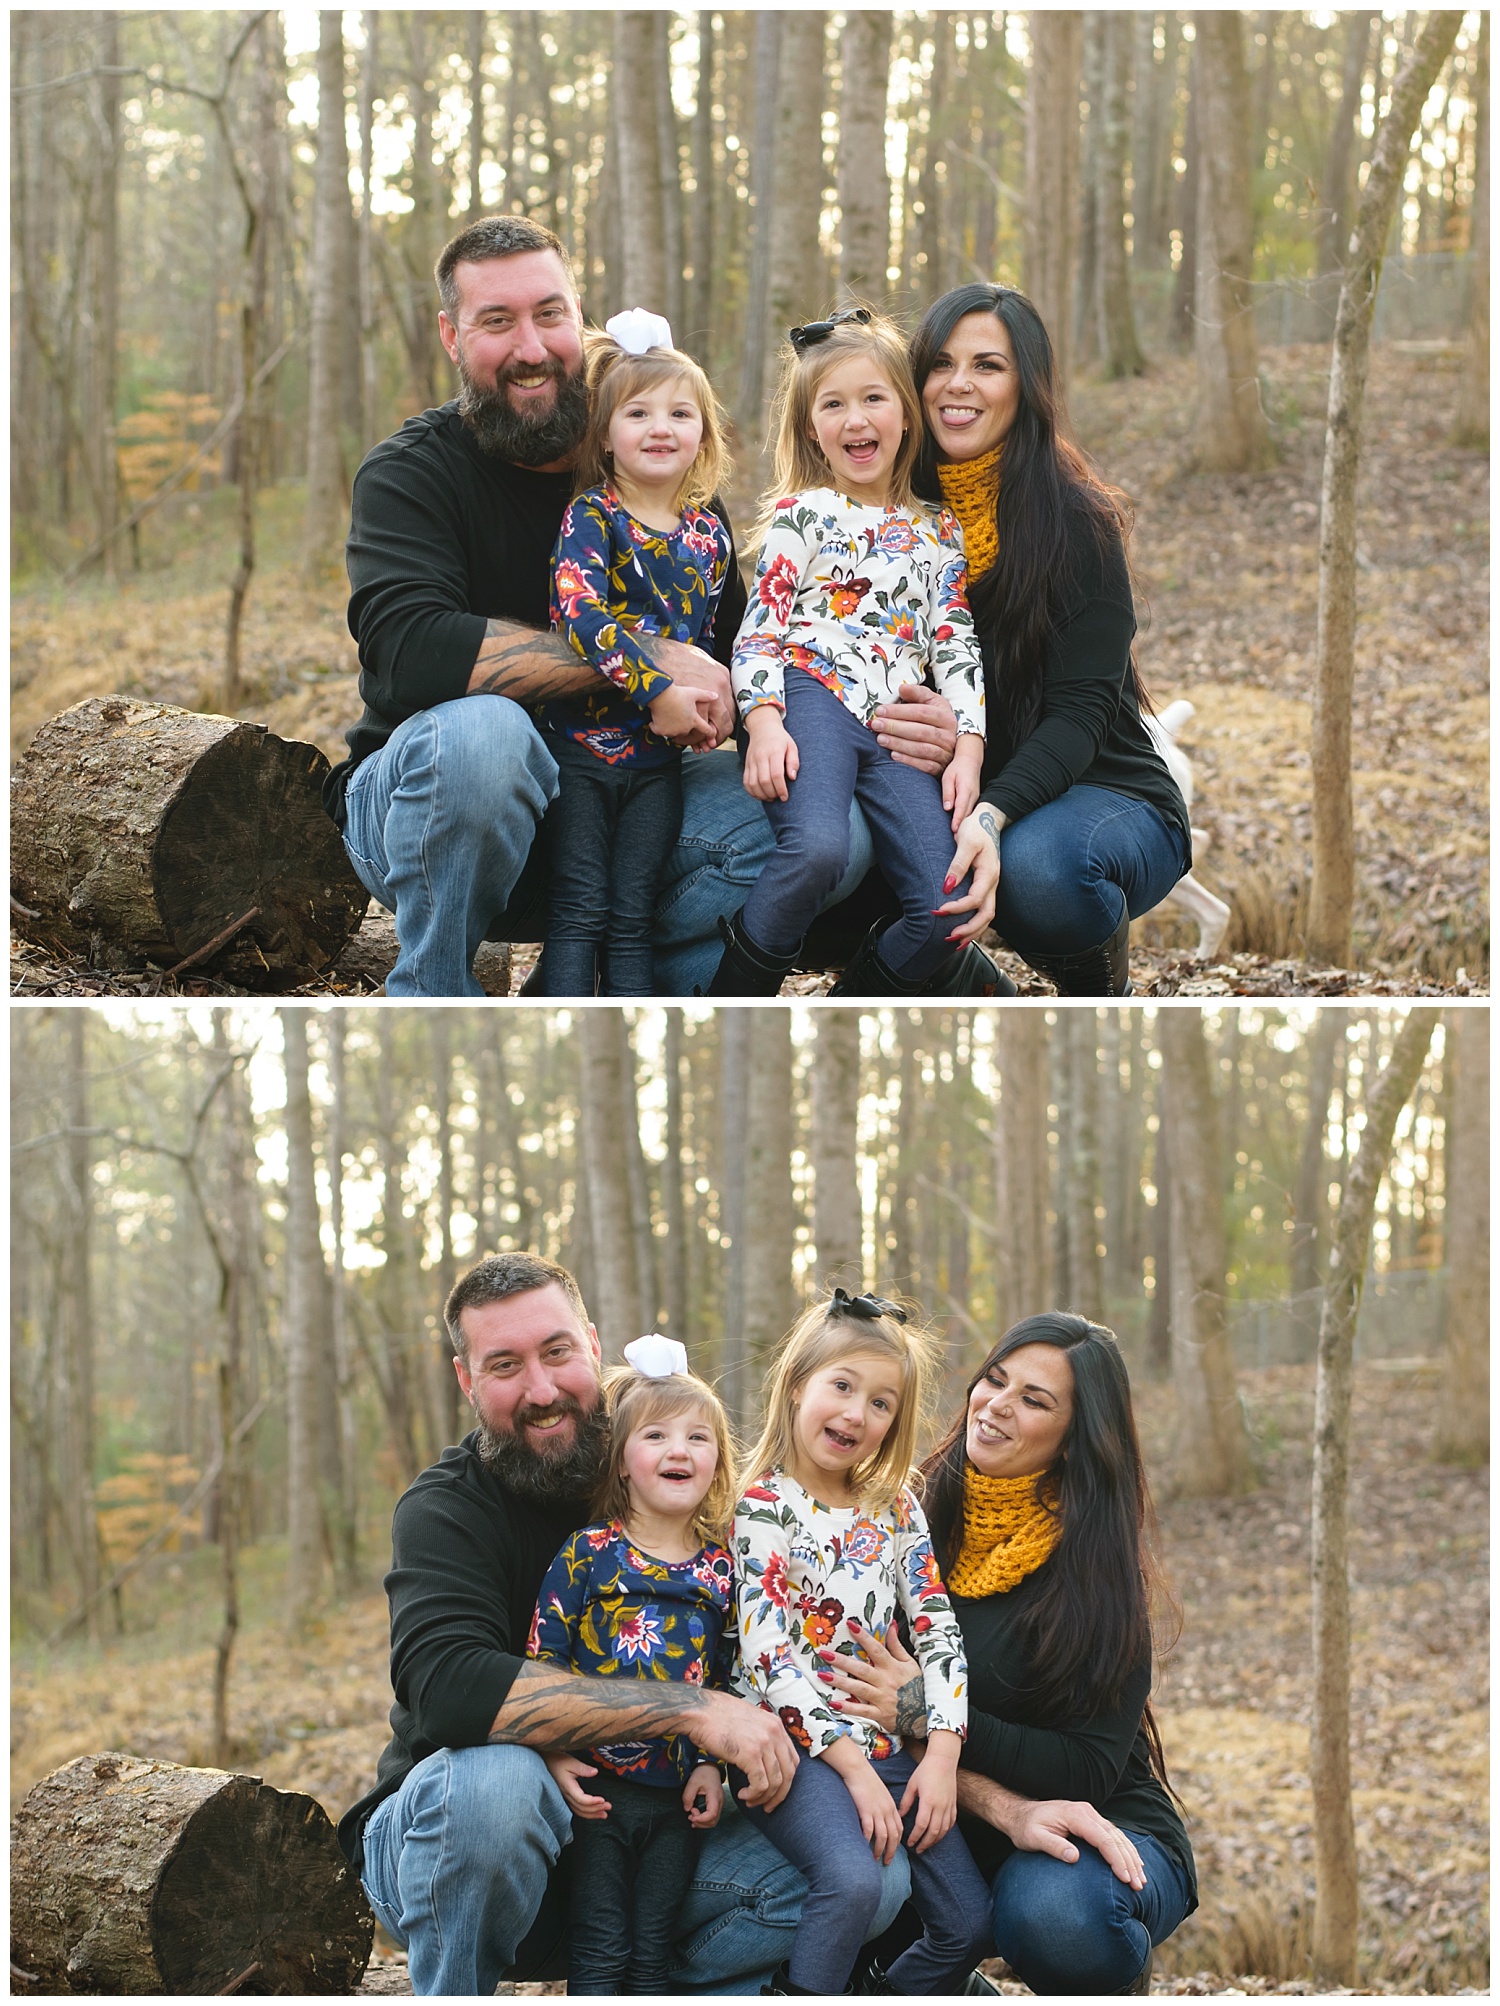 these are images of a family during a lifestyle family session. they were taken in the family's backyard and everyone is smiling.